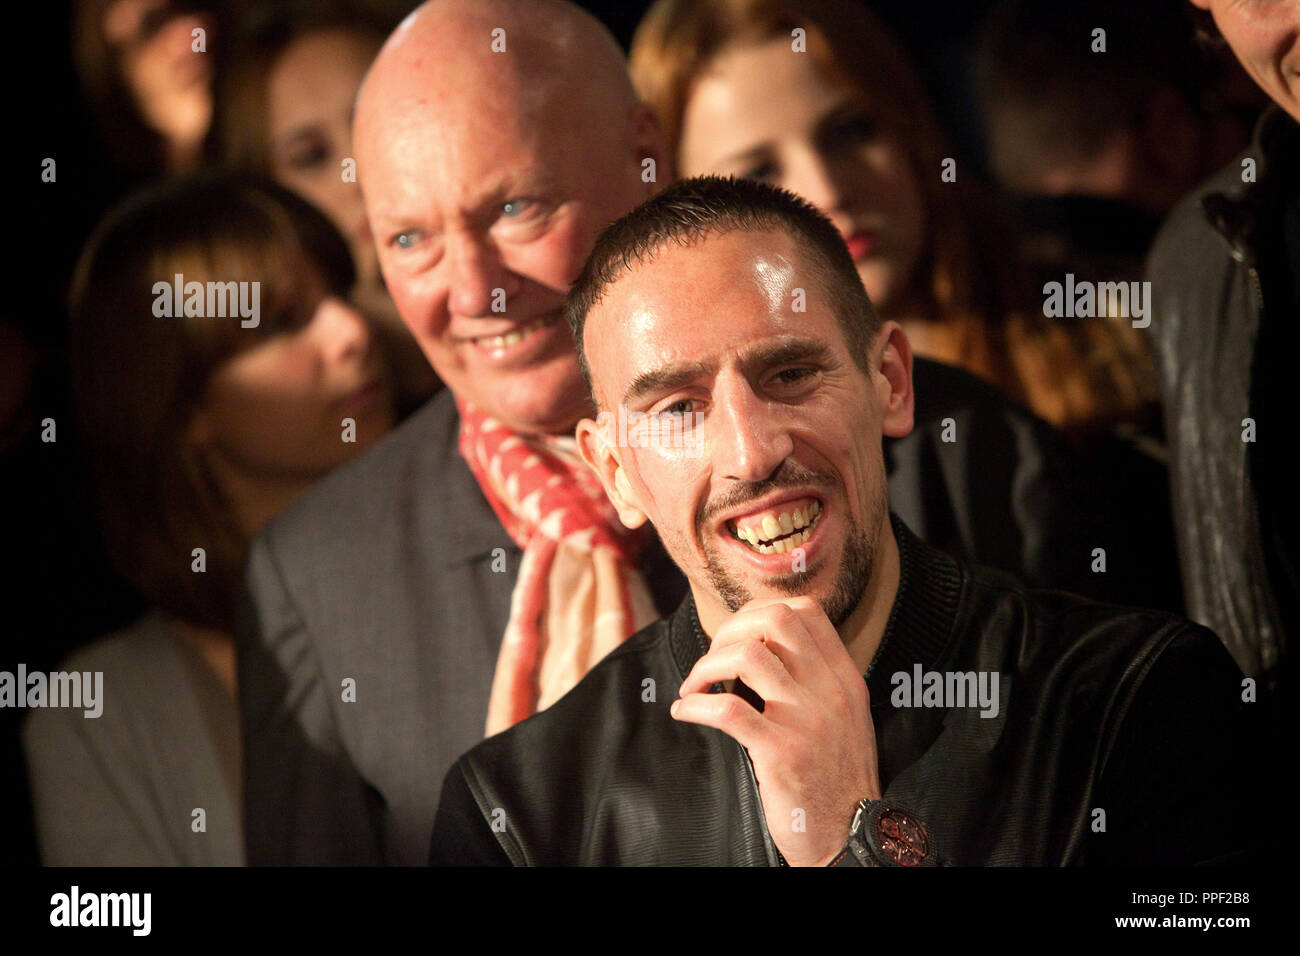 Chairman of Hublot Jean-Claude Biver (in the background) with Bayern München football player Franck Ribery at the presentation of the exclusive FC Bayern München fan clocks at the Hublot shop in Maximilian street, Munich, Germany Stock Photo